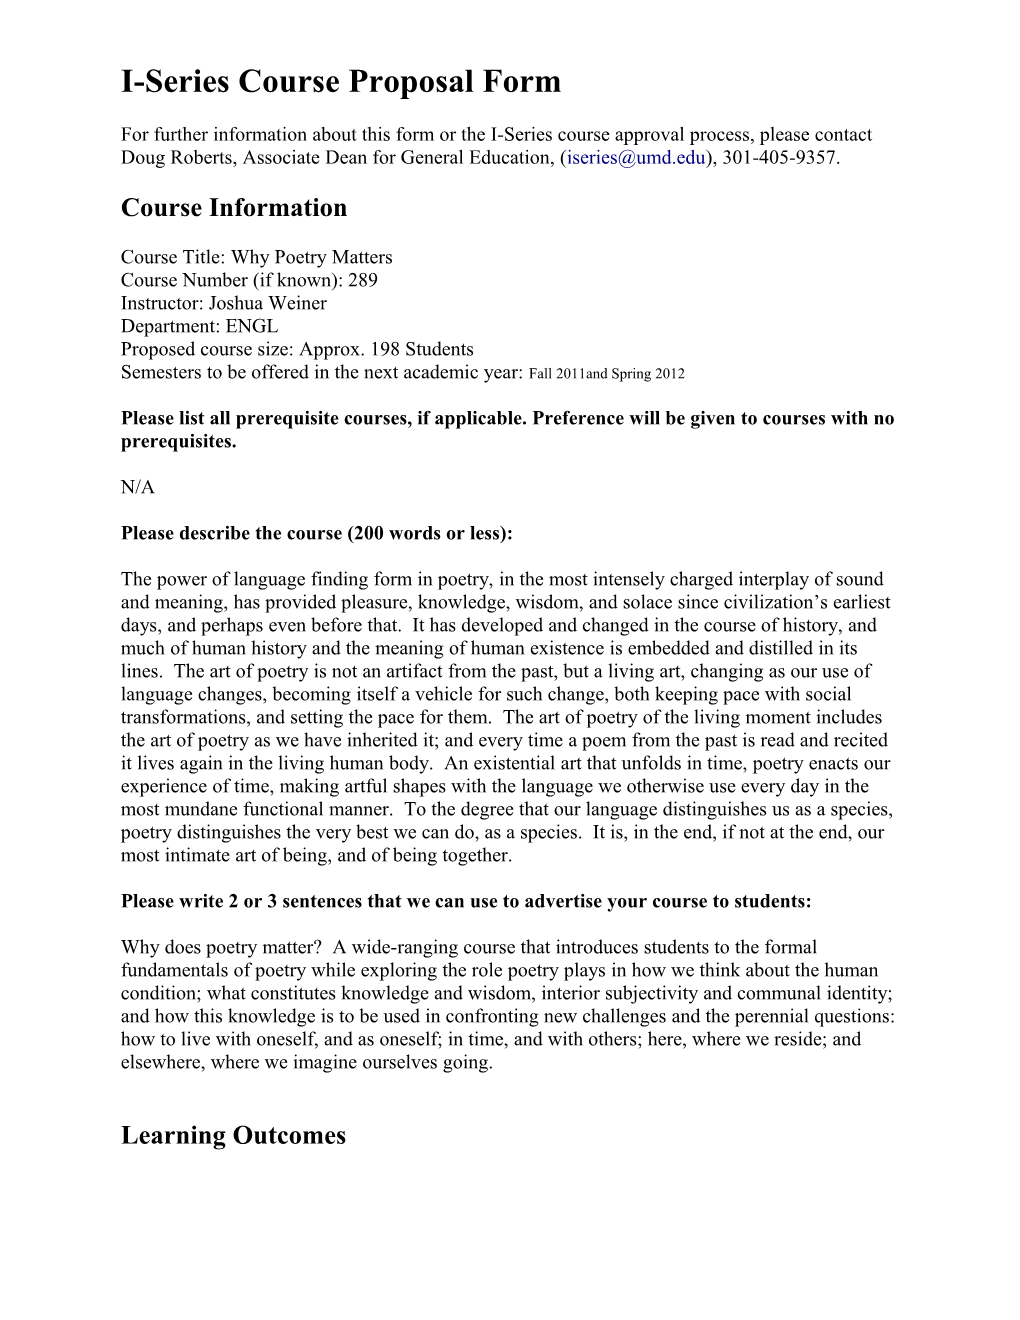 I-Series Course Proposal Form